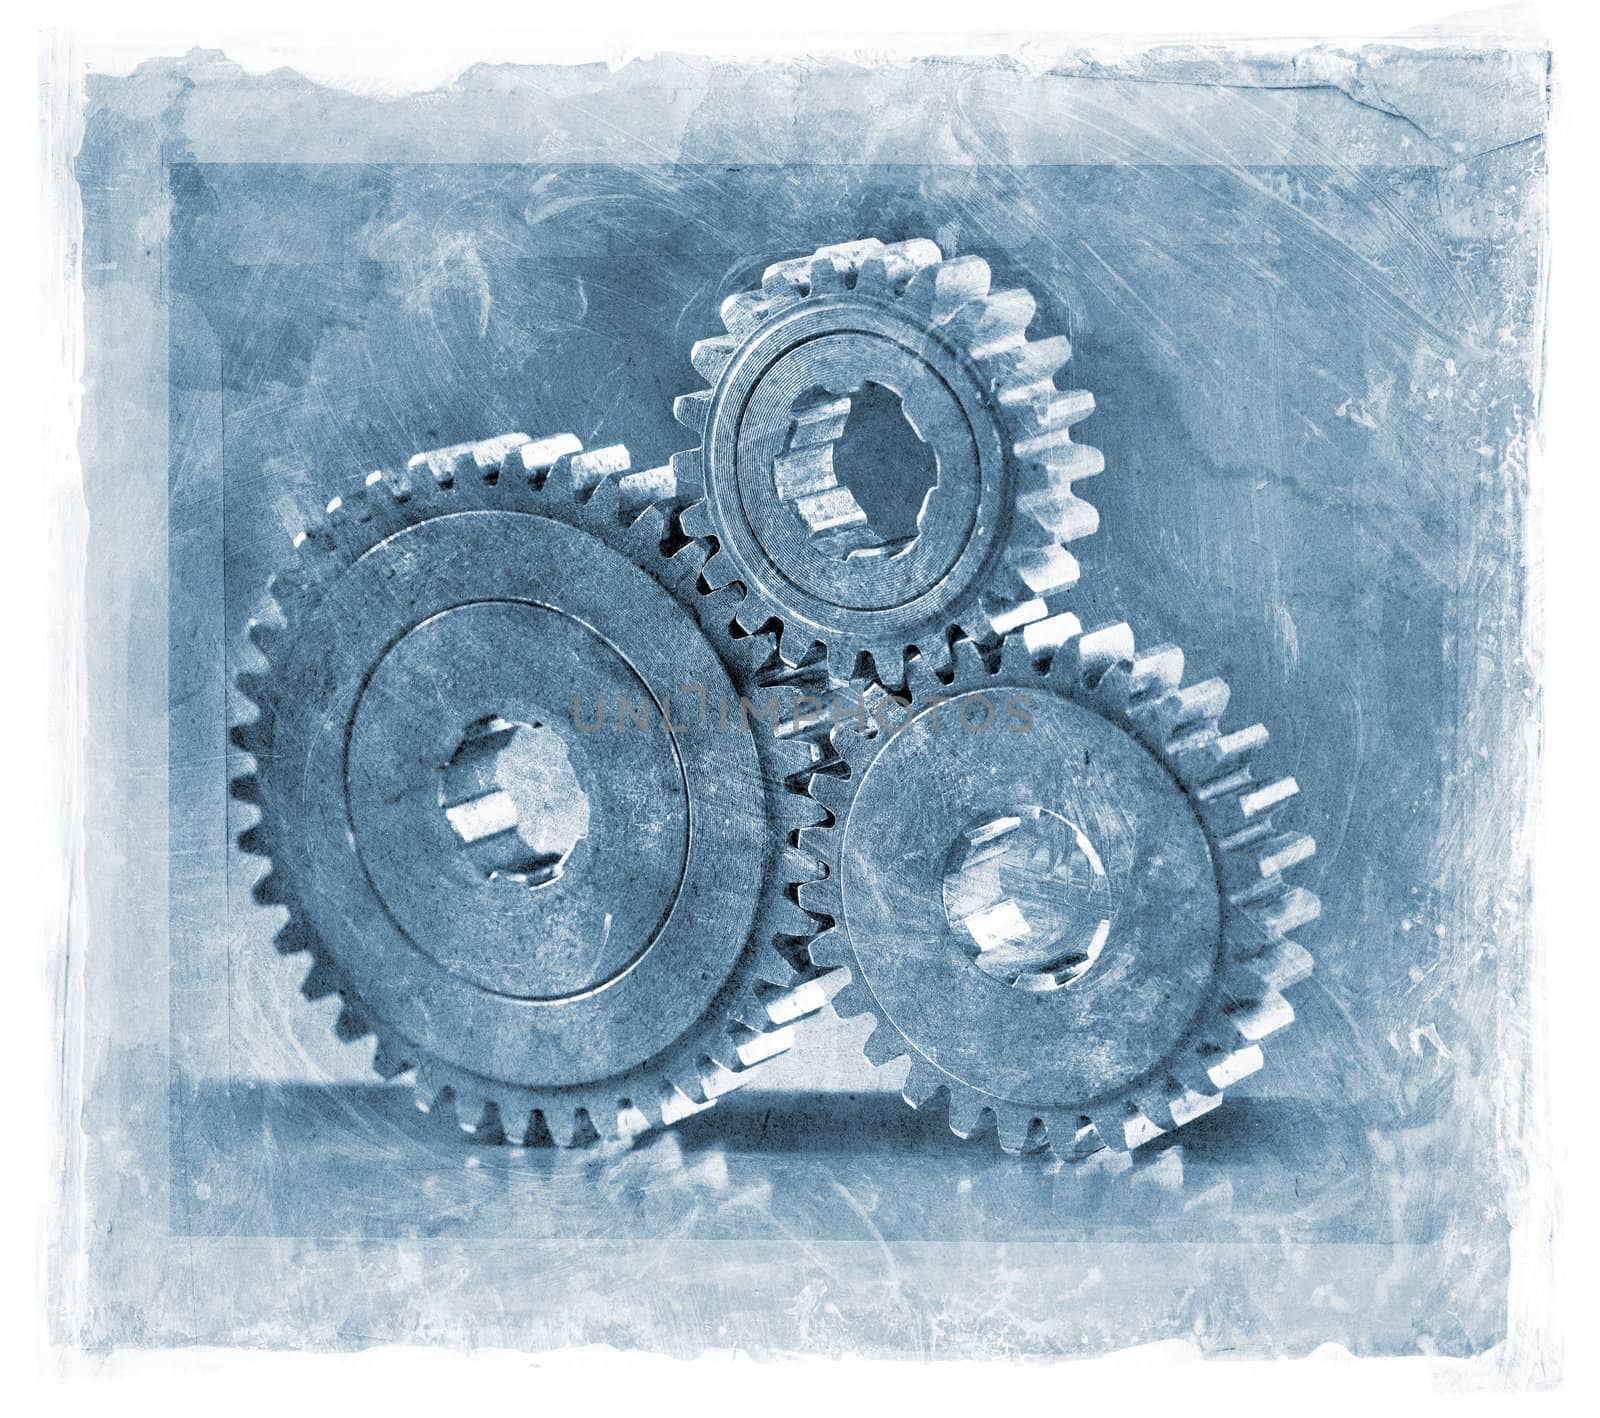 Cogs by Stocksnapper